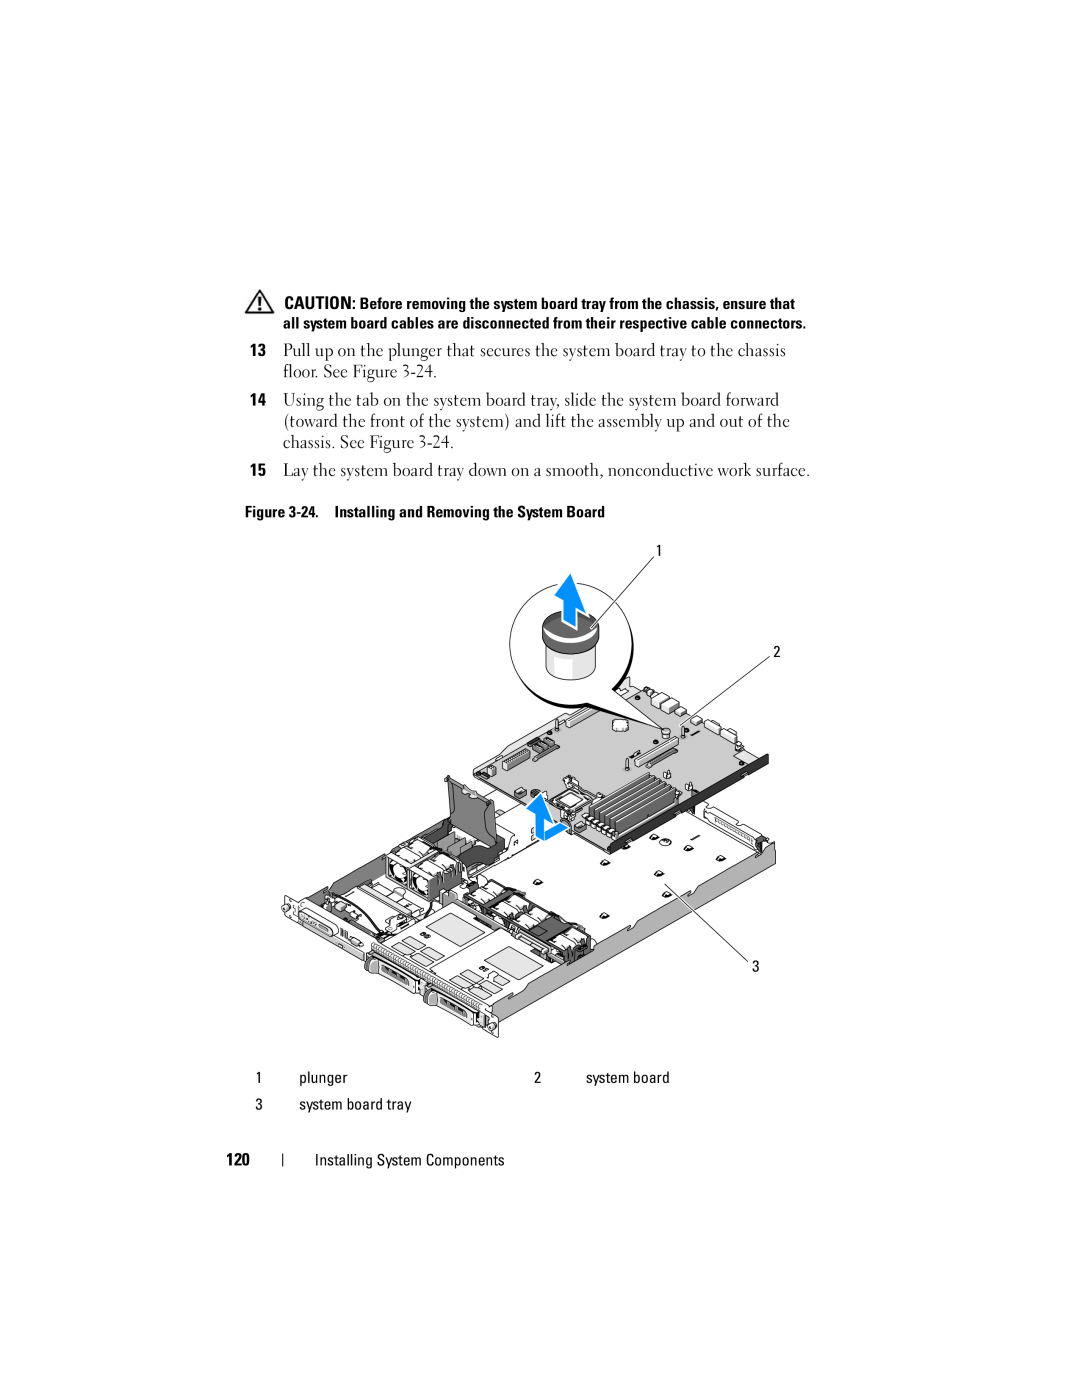 Dell R300 owner manual Pull up on the plunger that secures the system board tray to the chassis floor. See Figure 